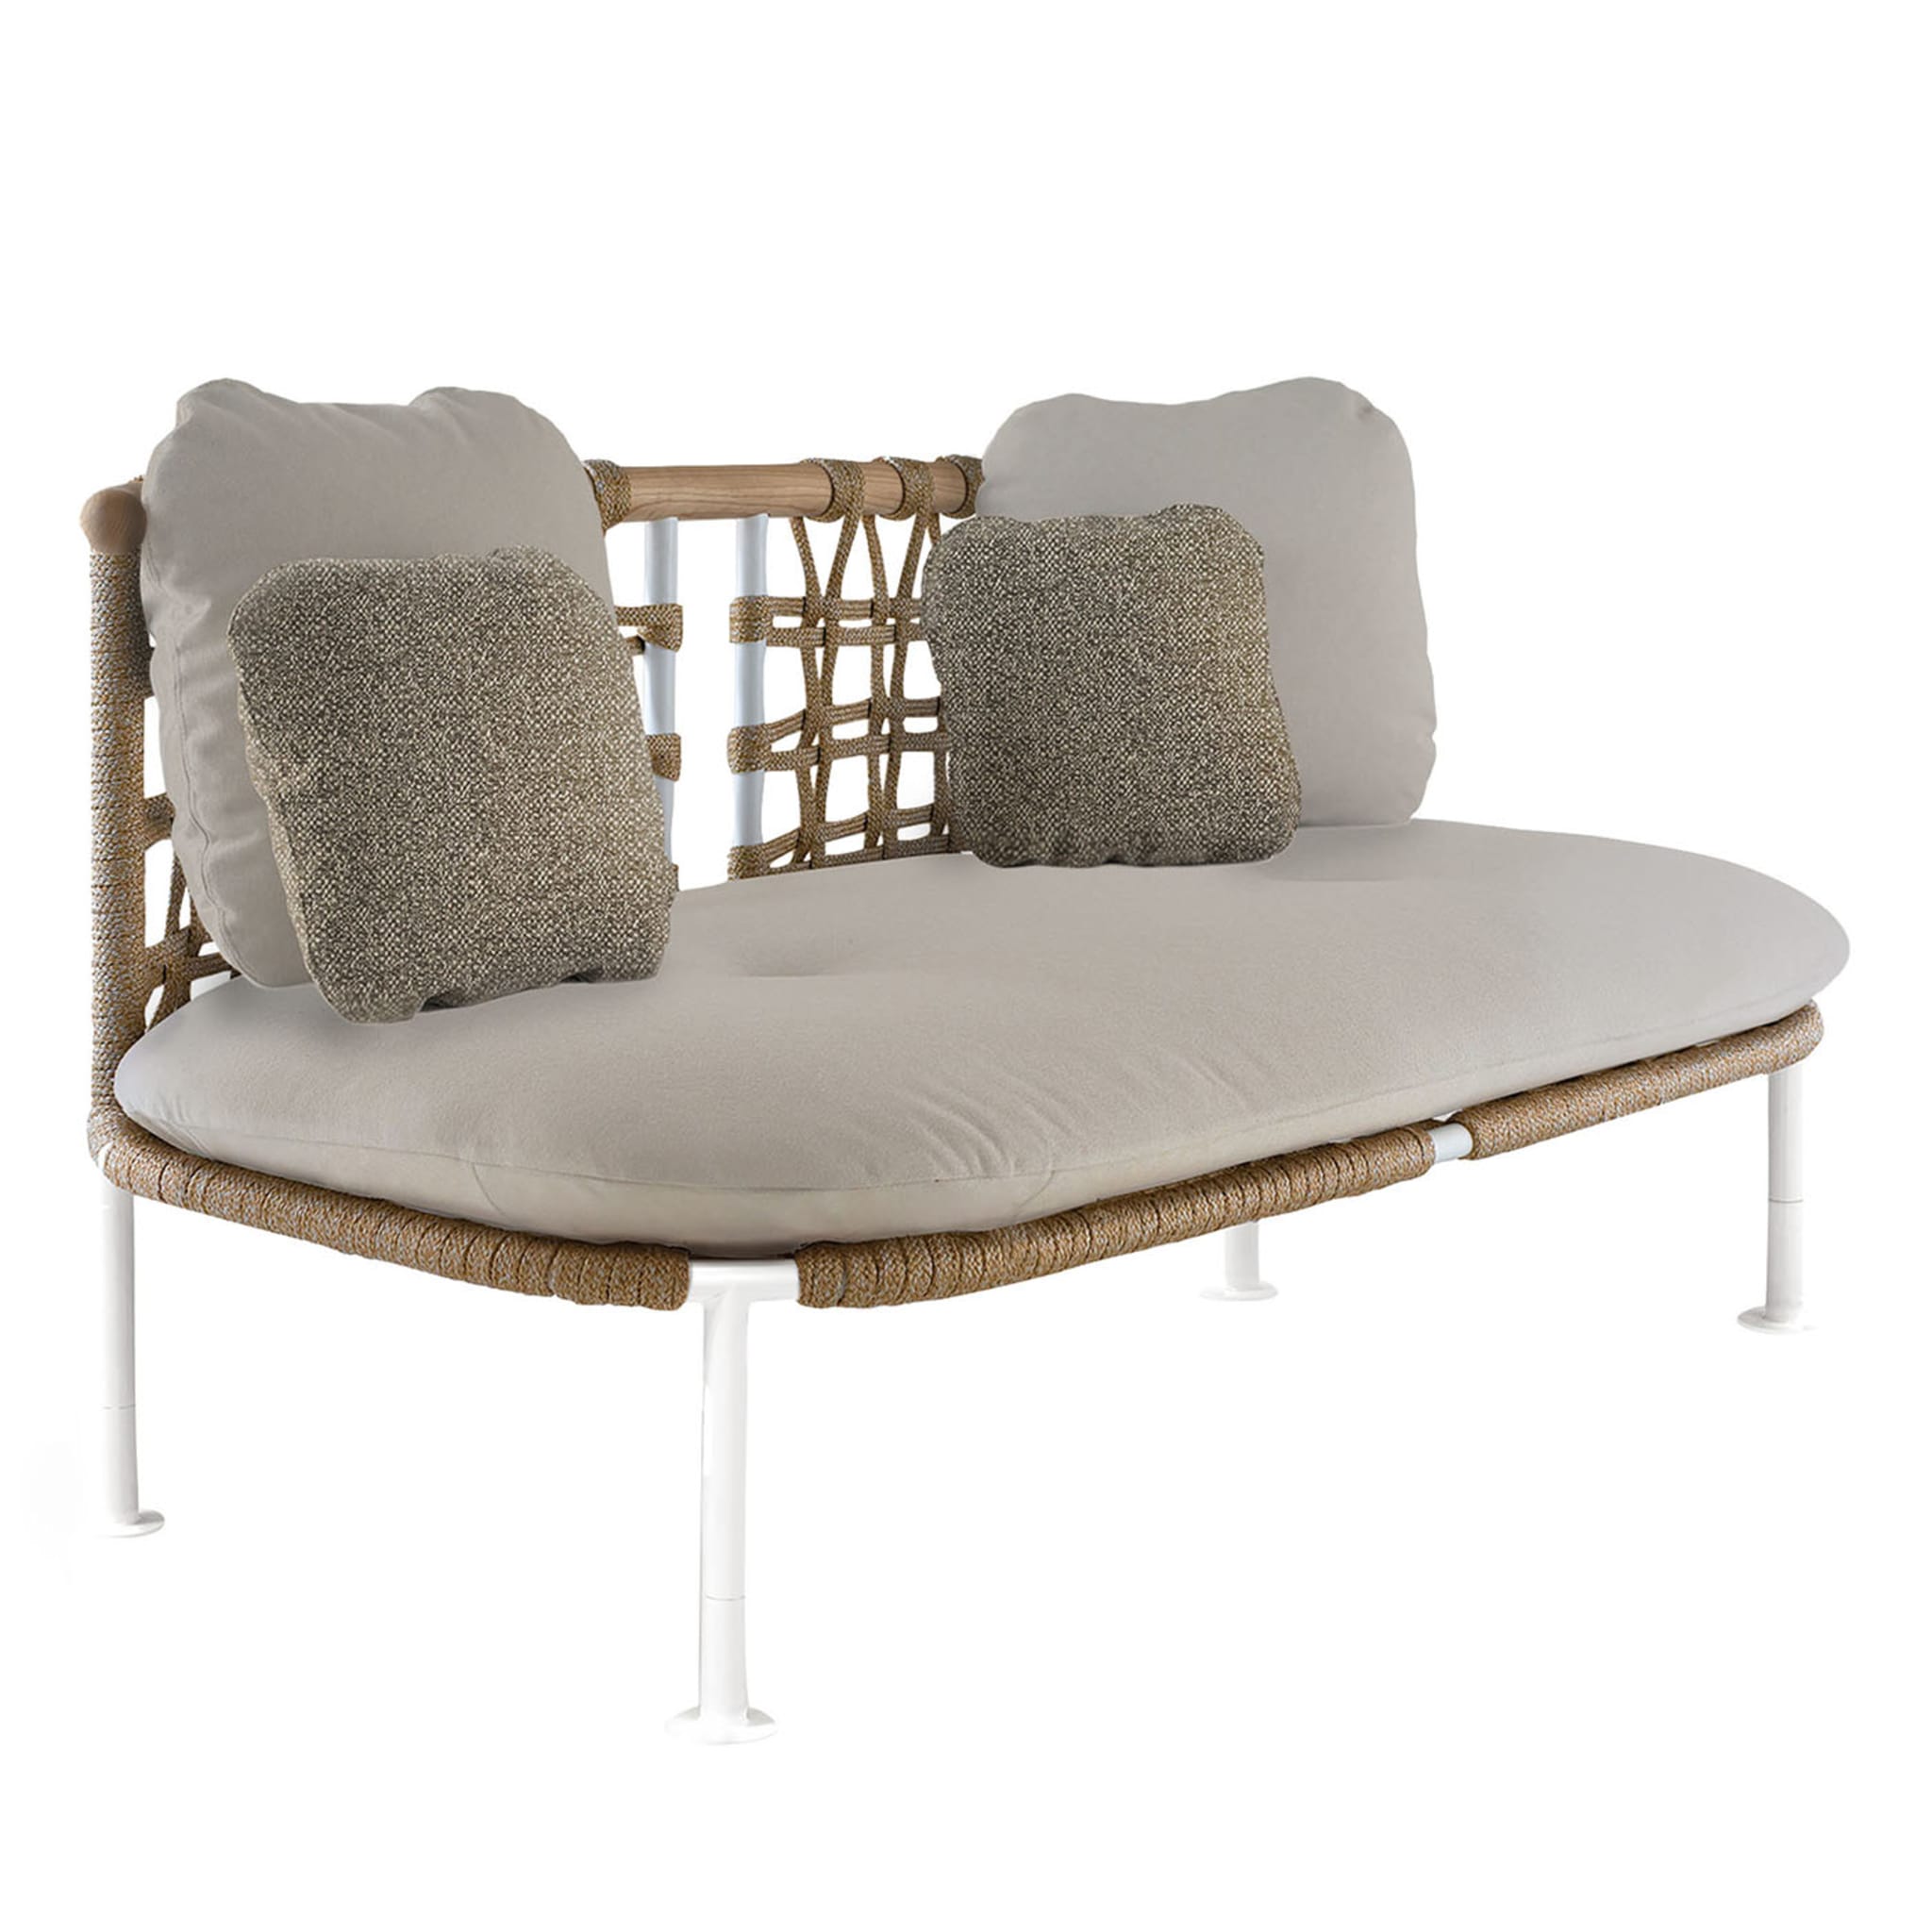 B. Taupe Outdoor Sofa by Copiosa Lab - Main view